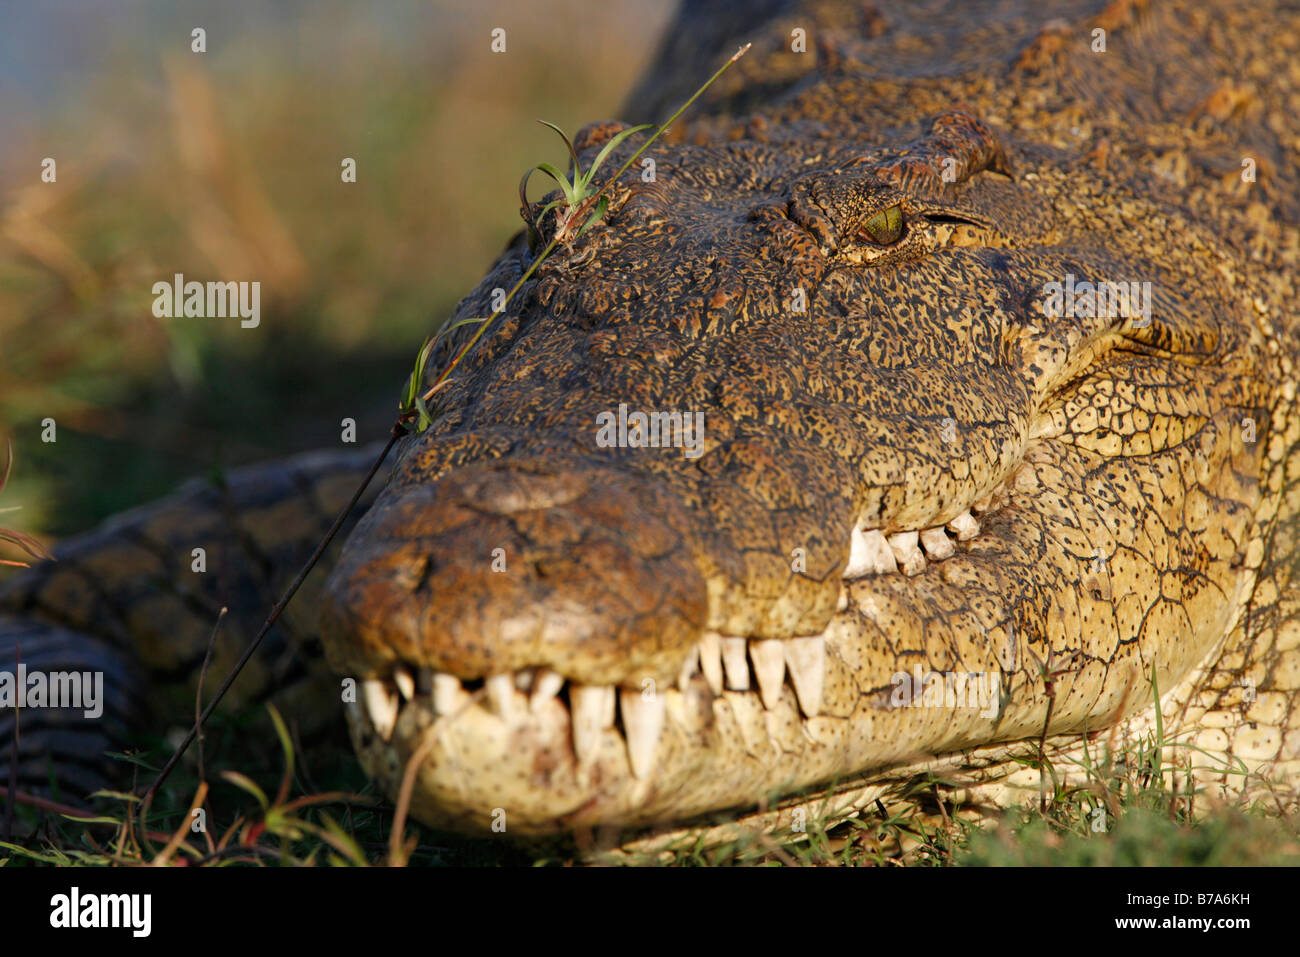 Portrait of a Nile crocodile sunning with eye in sharp focus Stock Photo